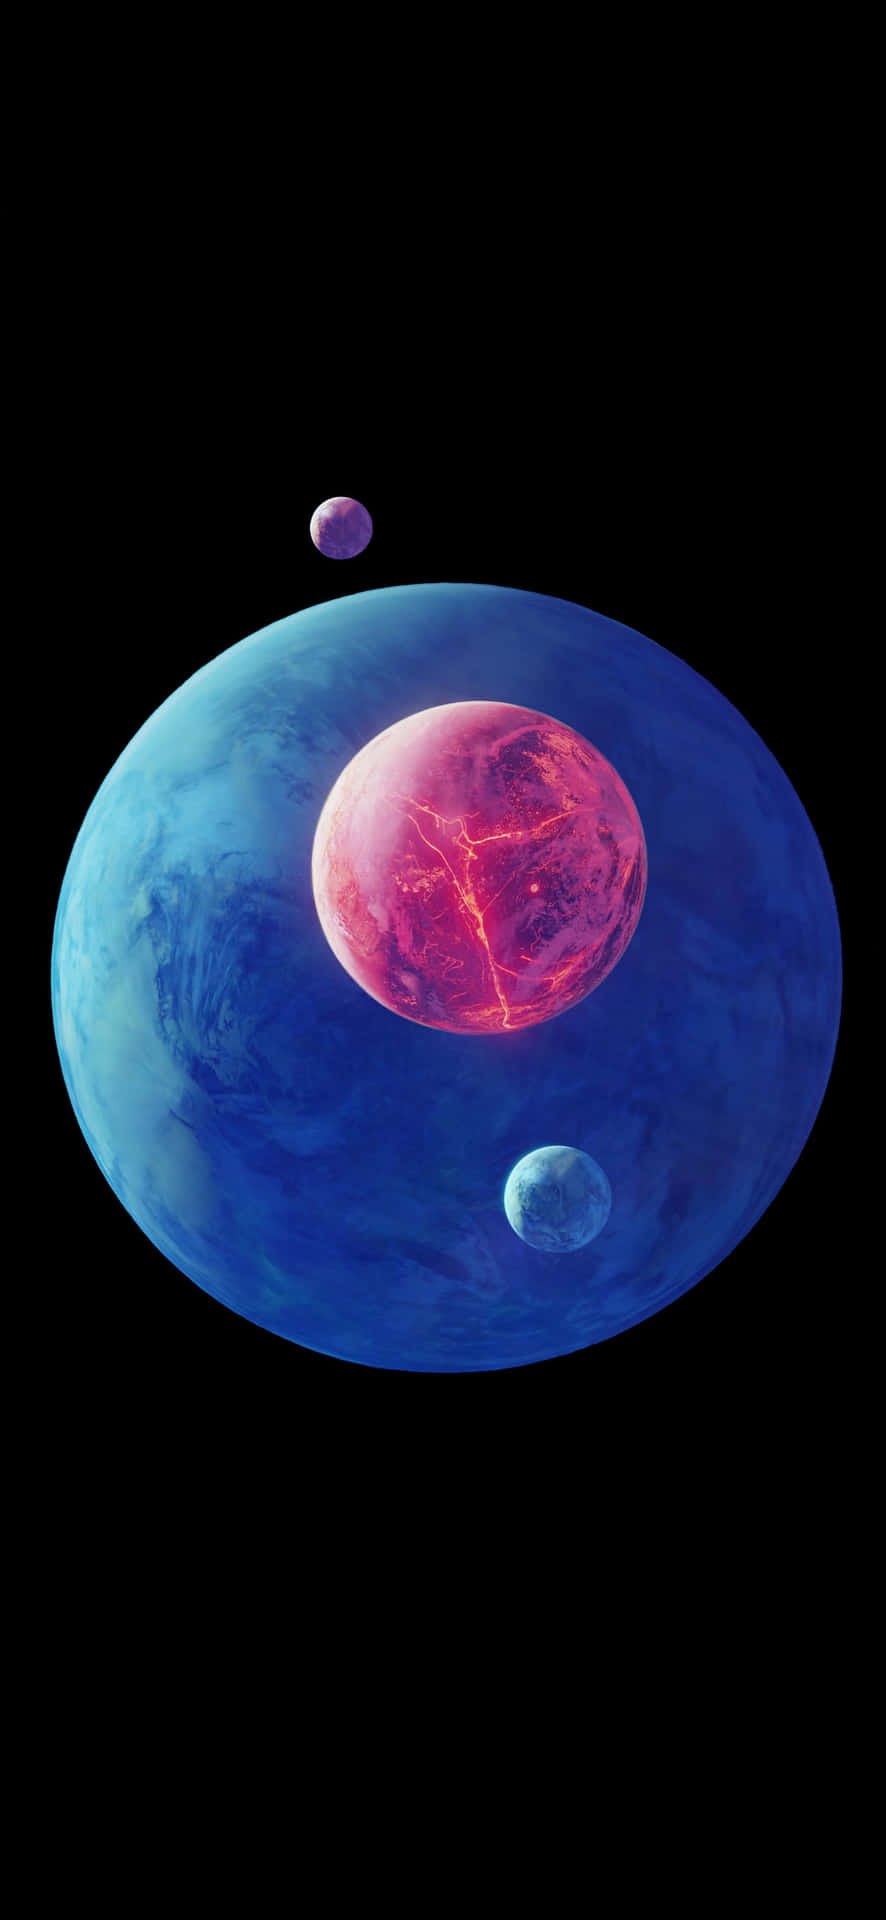 A Planet With Two Blue And Pink Planets Wallpaper